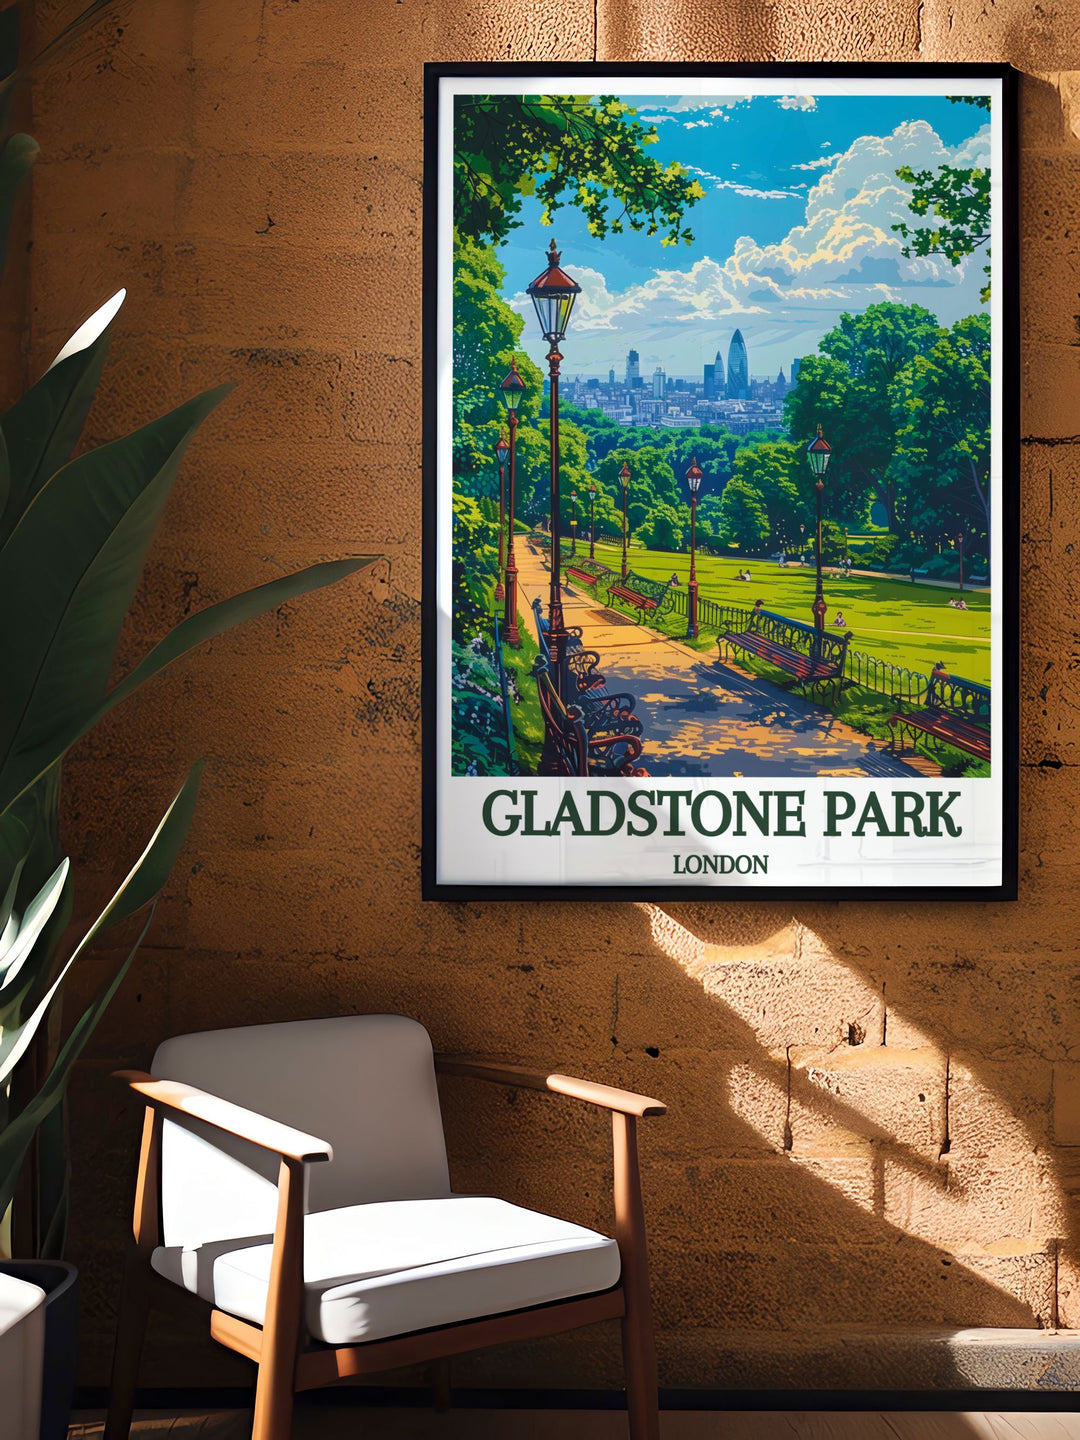 Framed art of Gladstone Park, emphasizing the parks lush landscapes and serene atmosphere, perfect for those who love the natural beauty and historical significance of London parks.